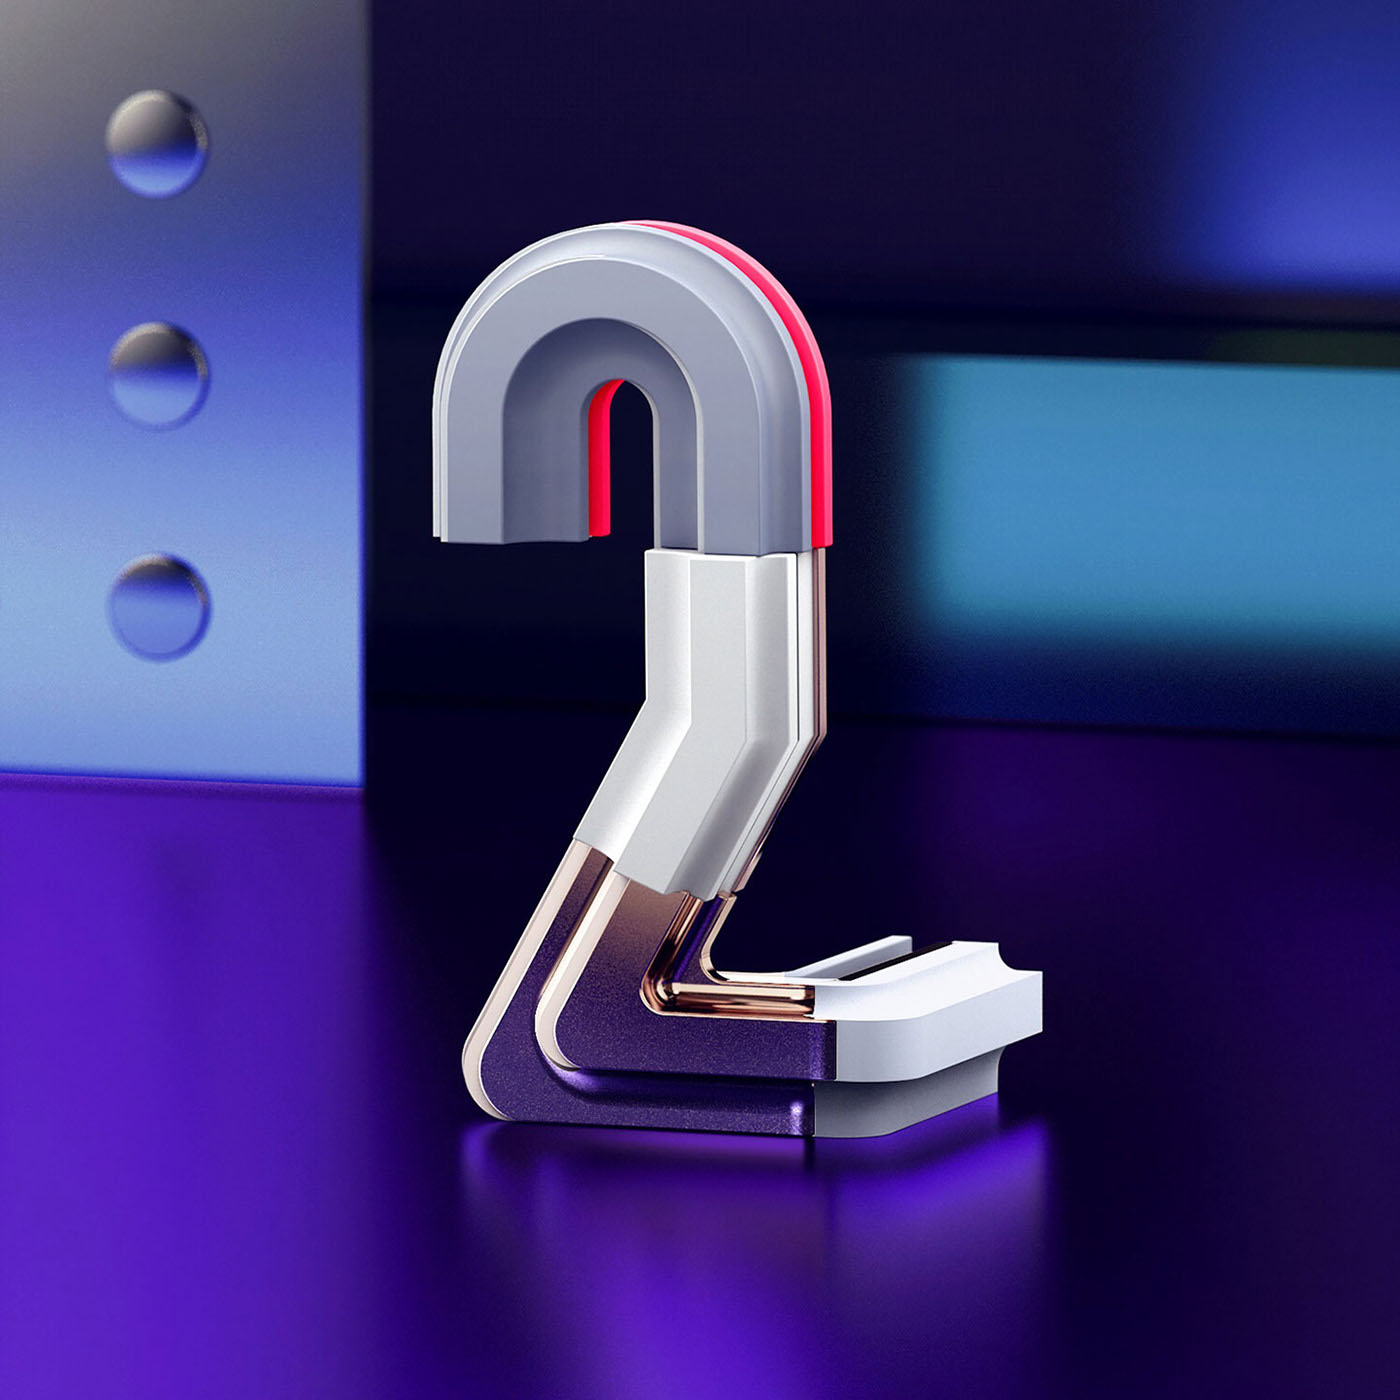 36daysoftype 3D numbers ufho graphic design singapore c4d 36 days type